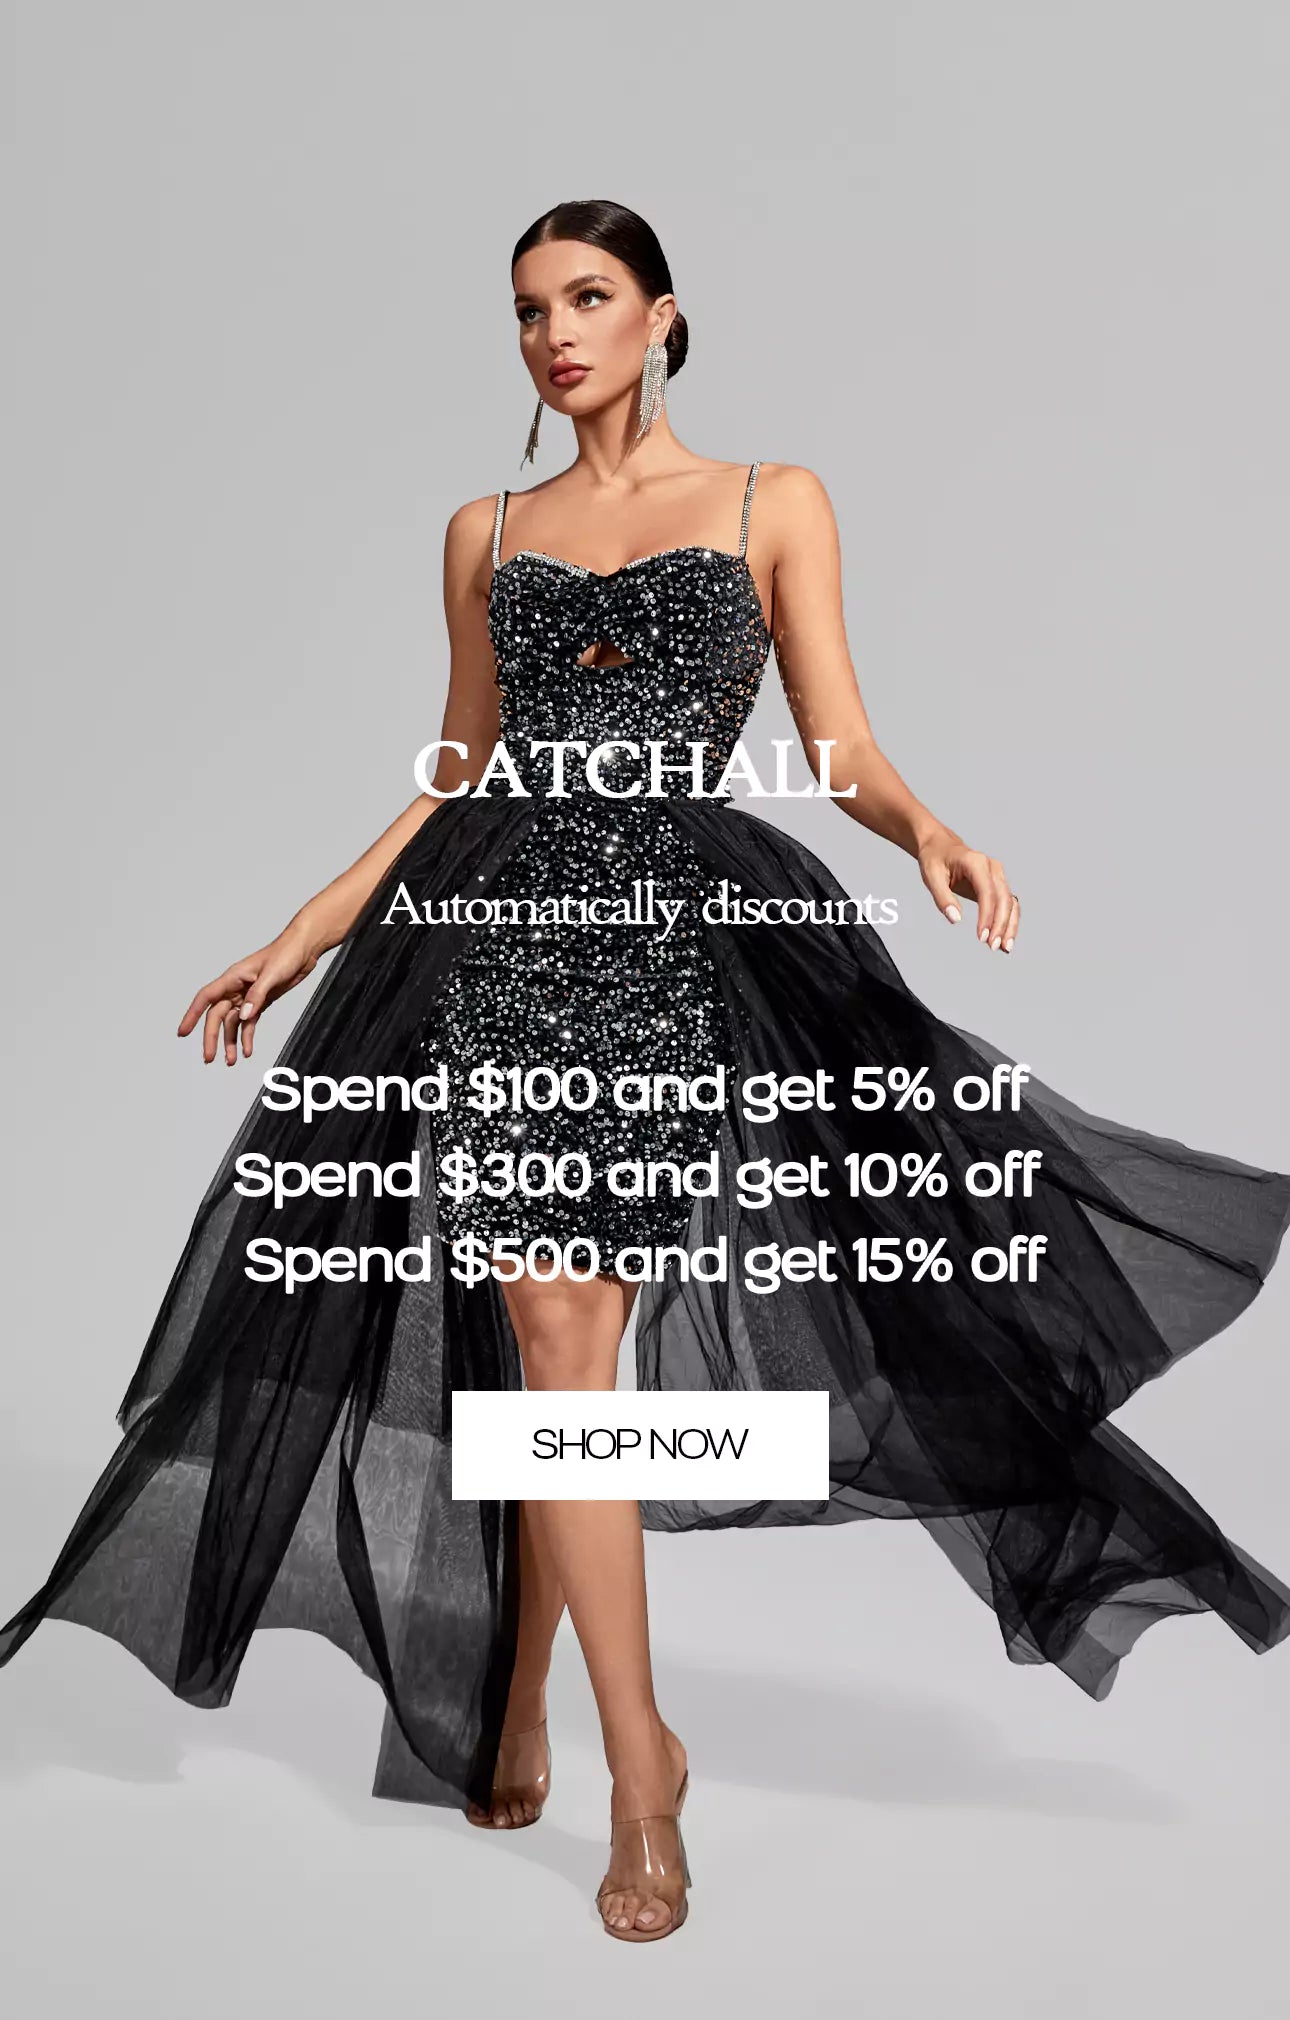 Bandage Dresses, Party & Prom Dresses | Shop at CATCHALL